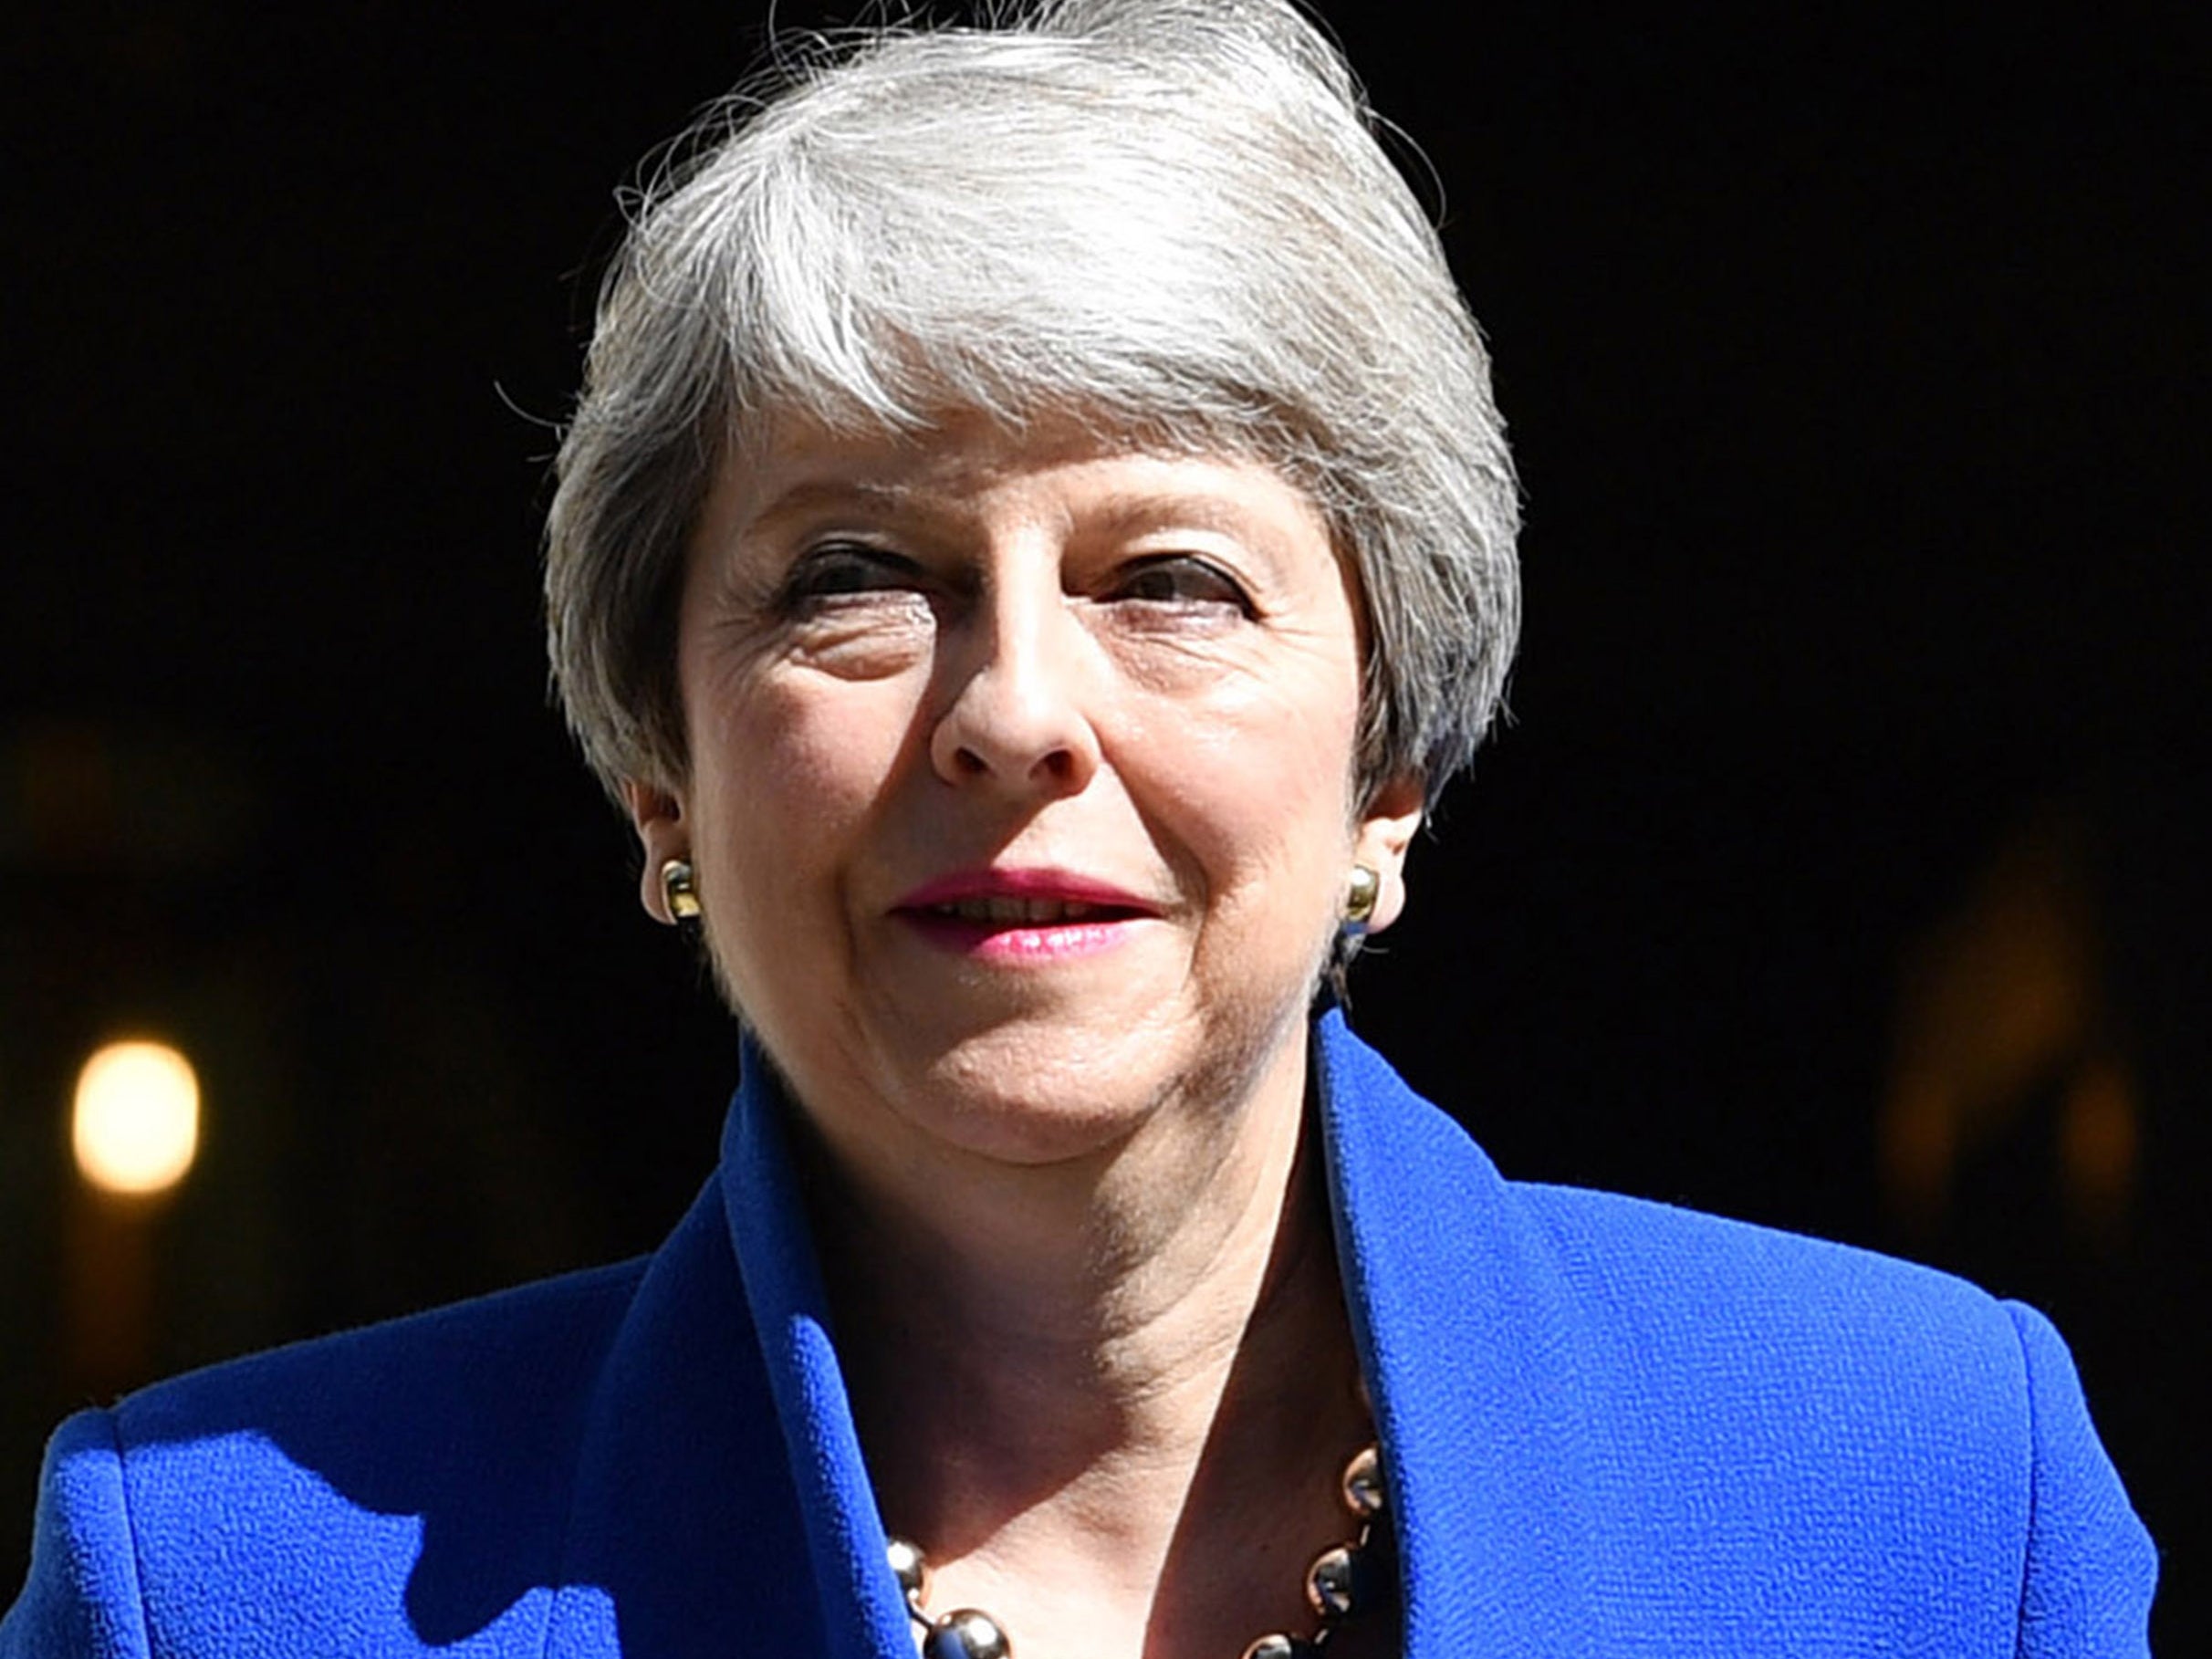 Theresa May, the former PM and former member of parliament for Maidenhead, will sit in the House of Lords